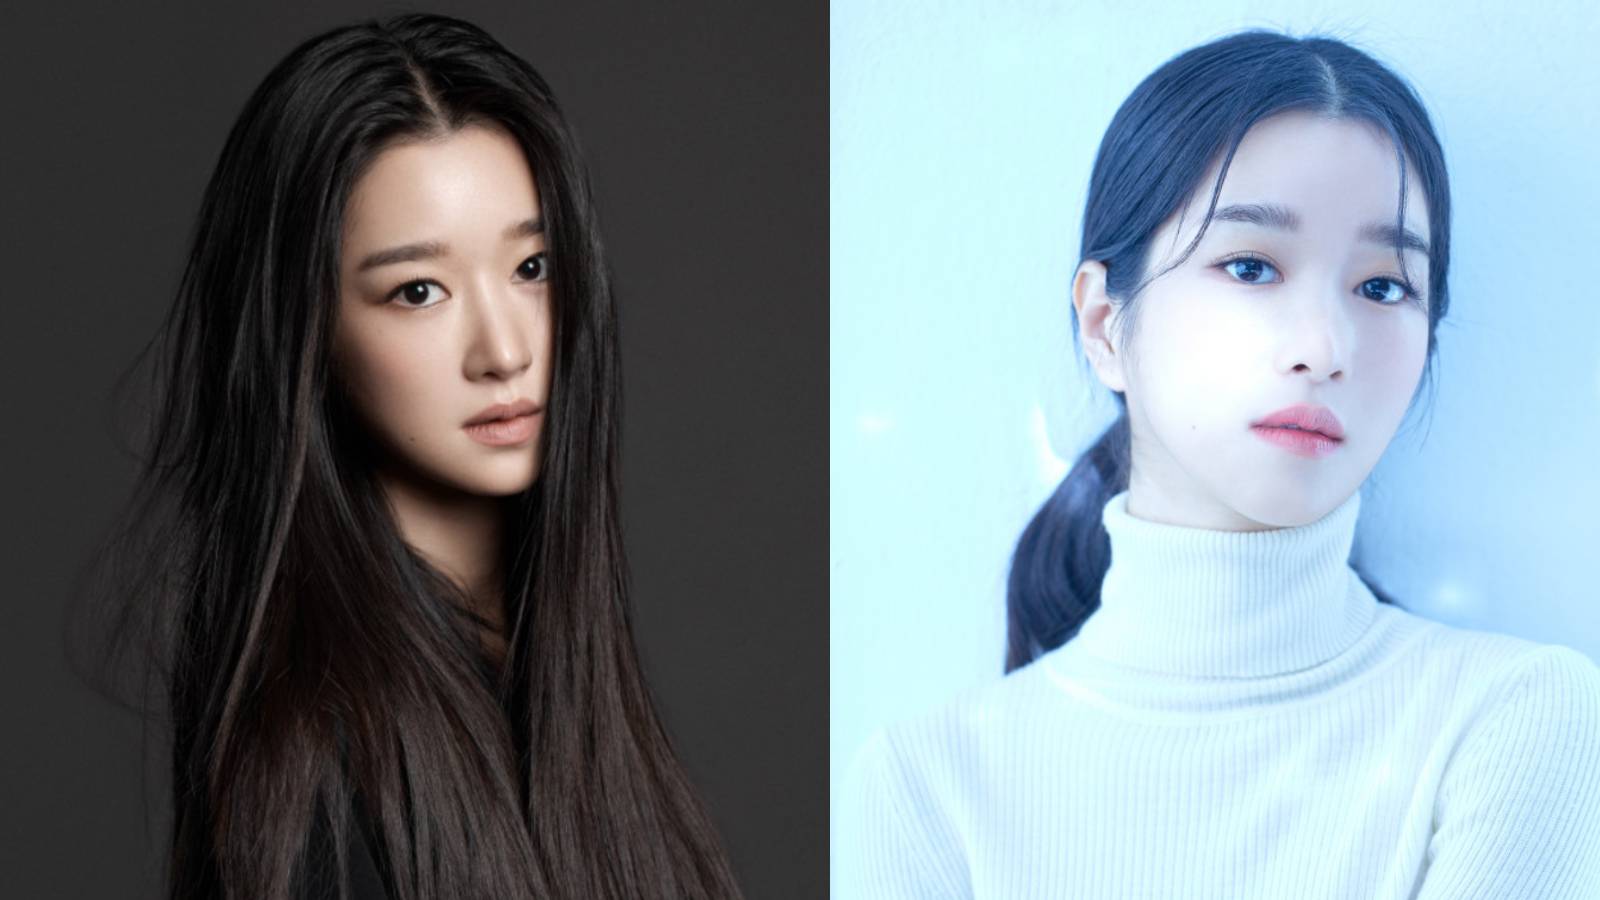 Seo Ye Ji Embroiled In New Controversy After Netizen Complains The Actress & Her Parents Are Inconsiderate Neighbours